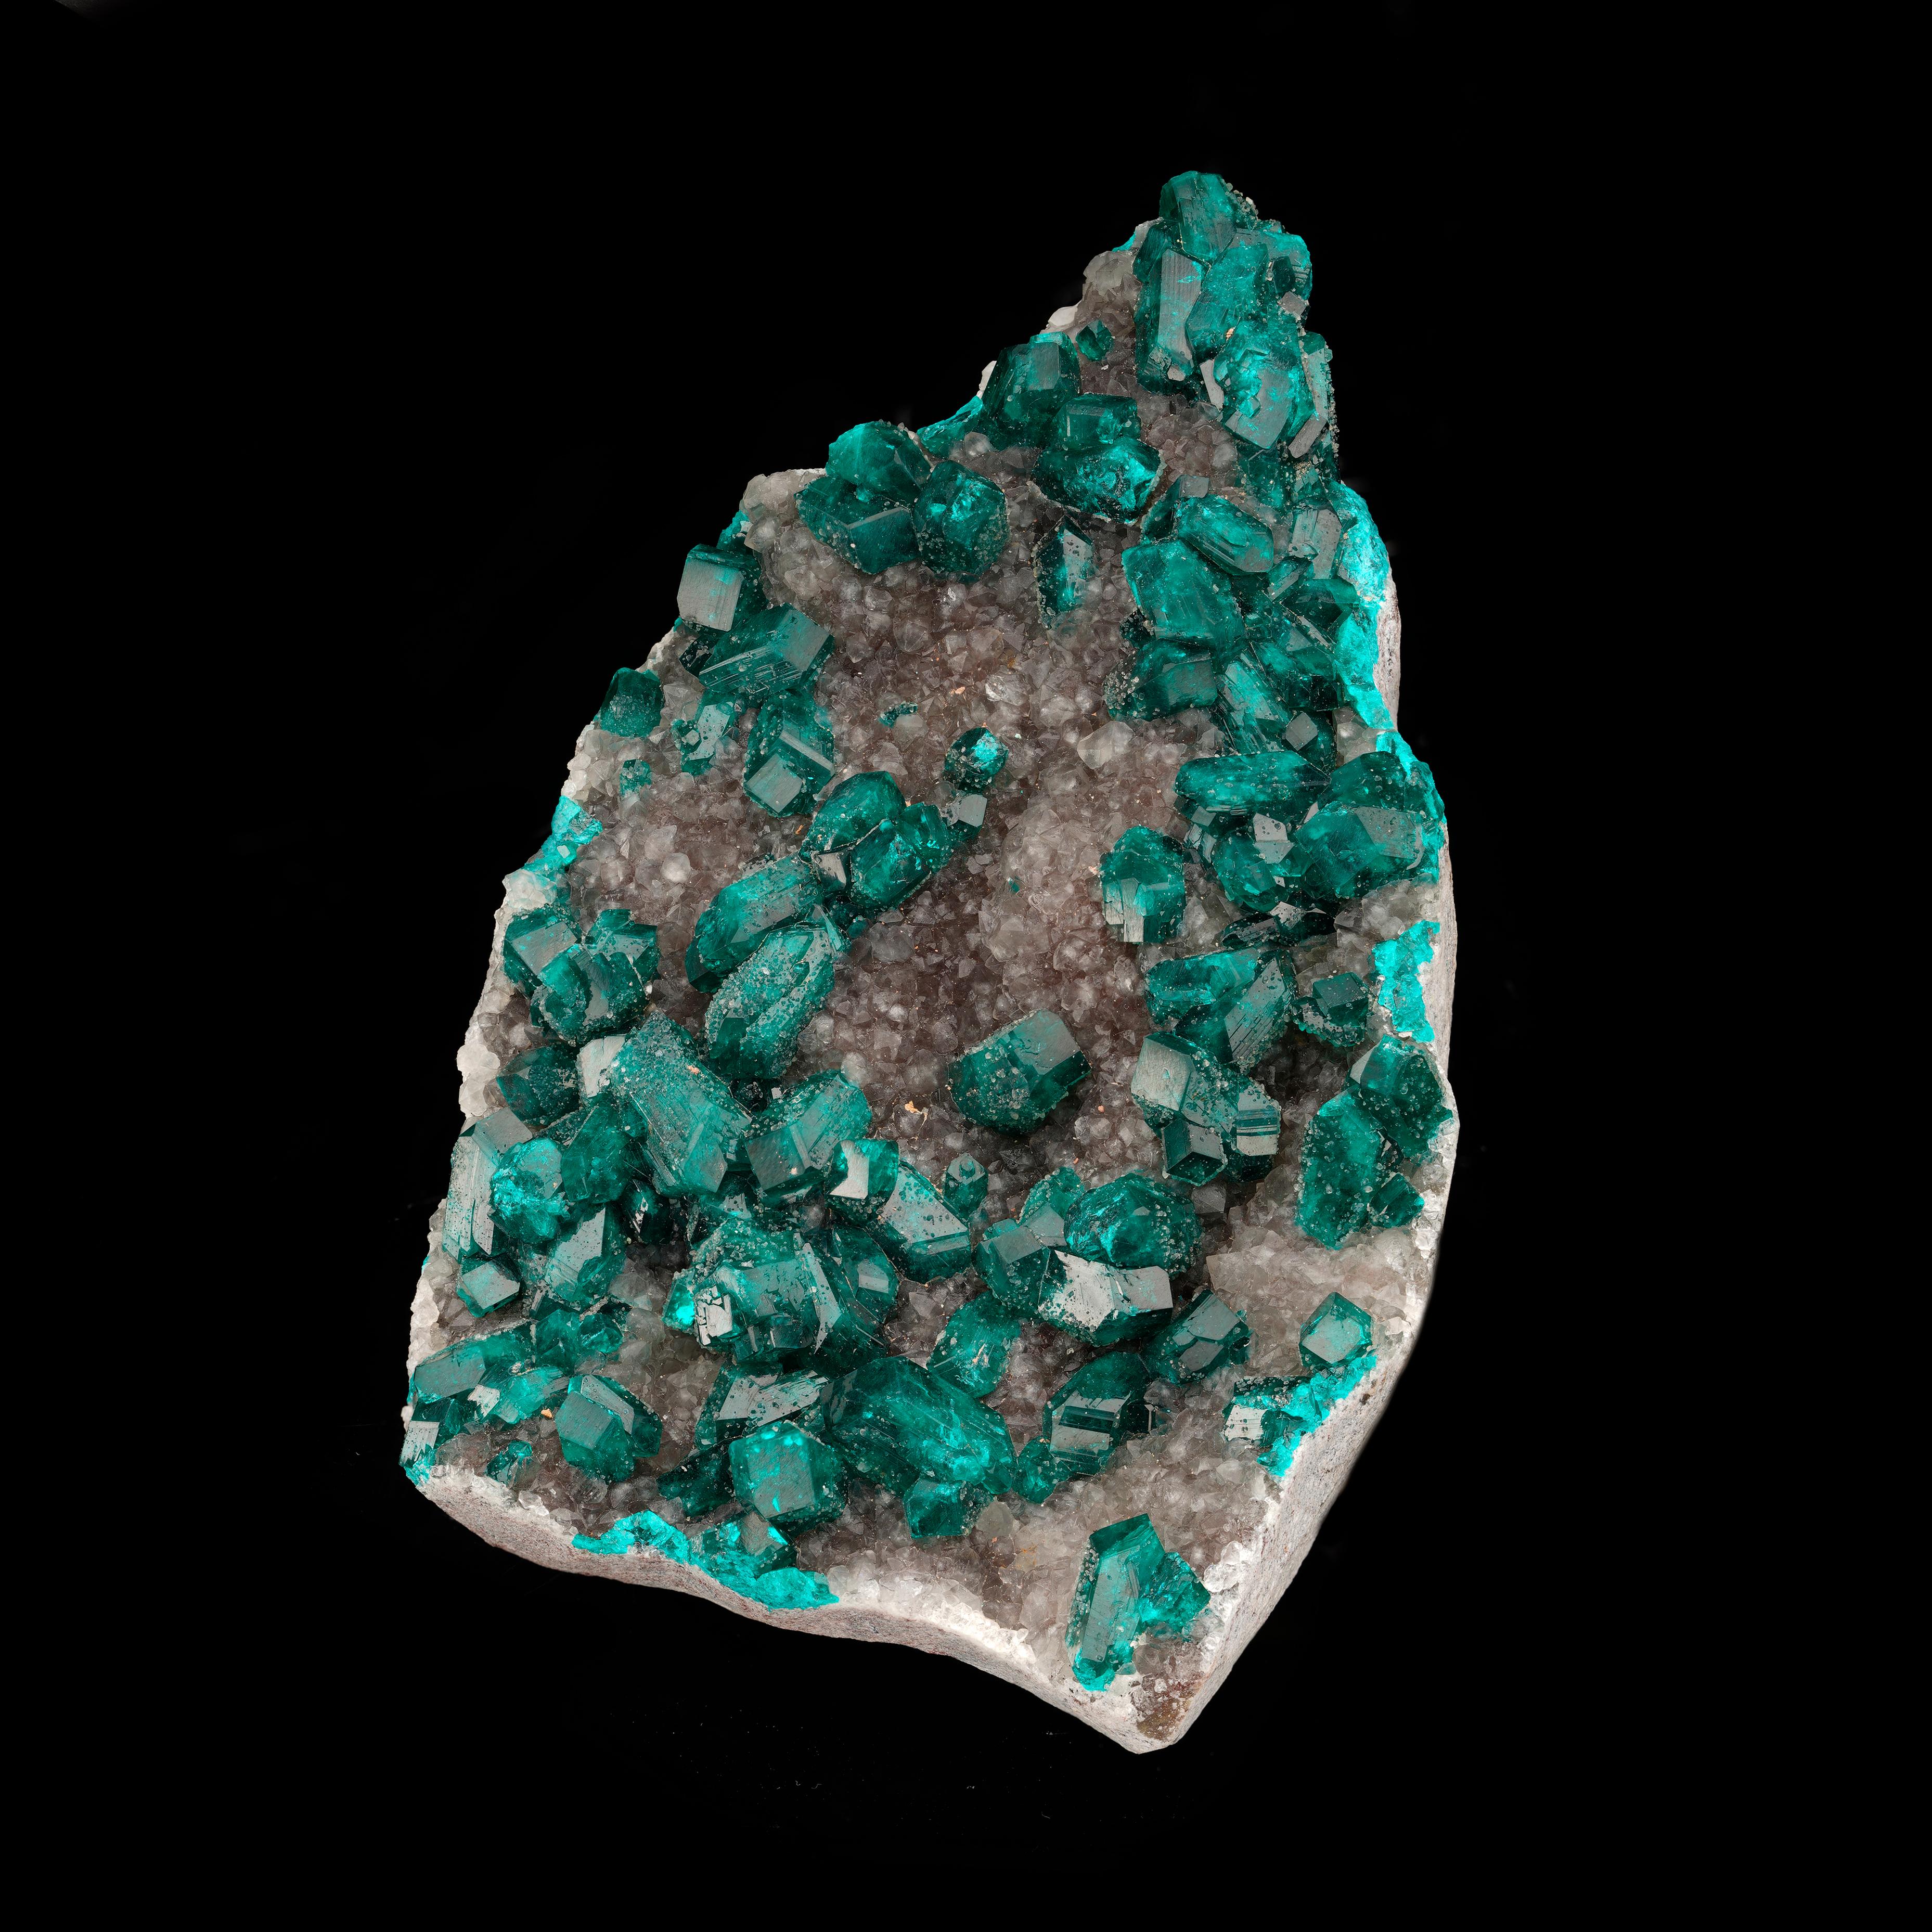 Congolese Dioptase on Calcite From the DRC For Sale